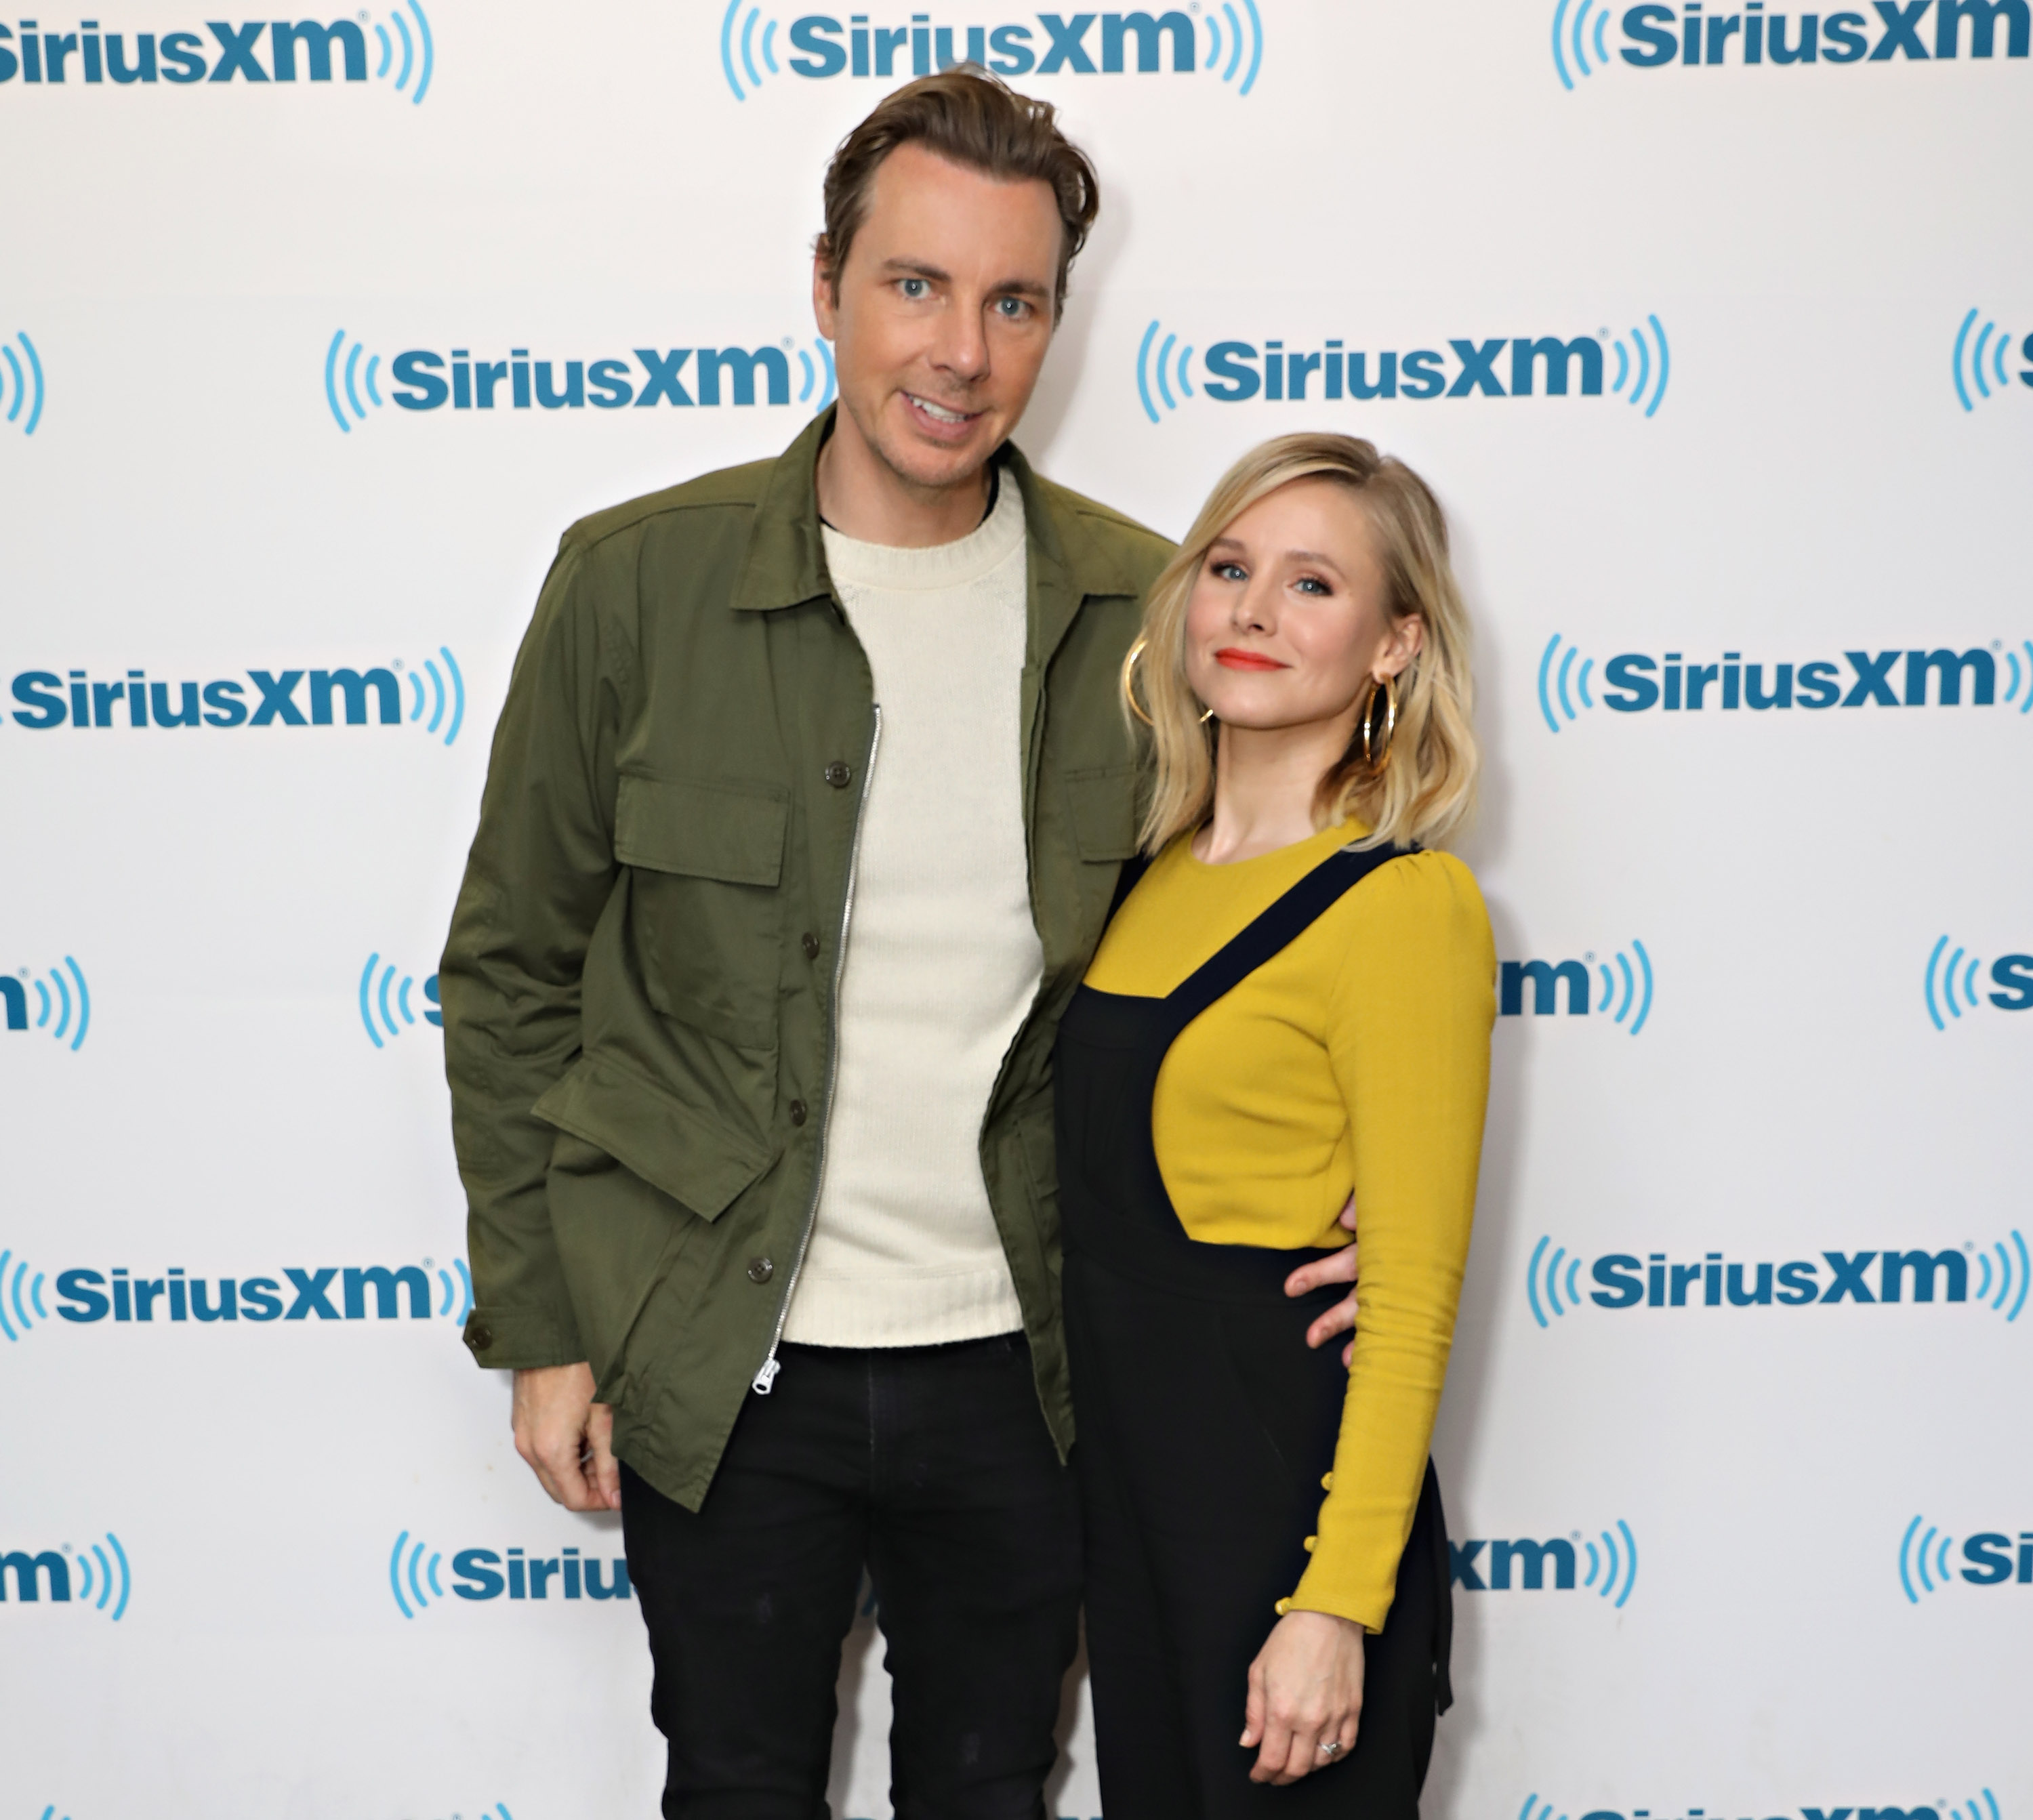 Actors Dax Shepard and Kristen Bell visit the SiriusXM Studios on March 22, 2017 in New York City. (Cindy Ord&mdash;Getty Images)